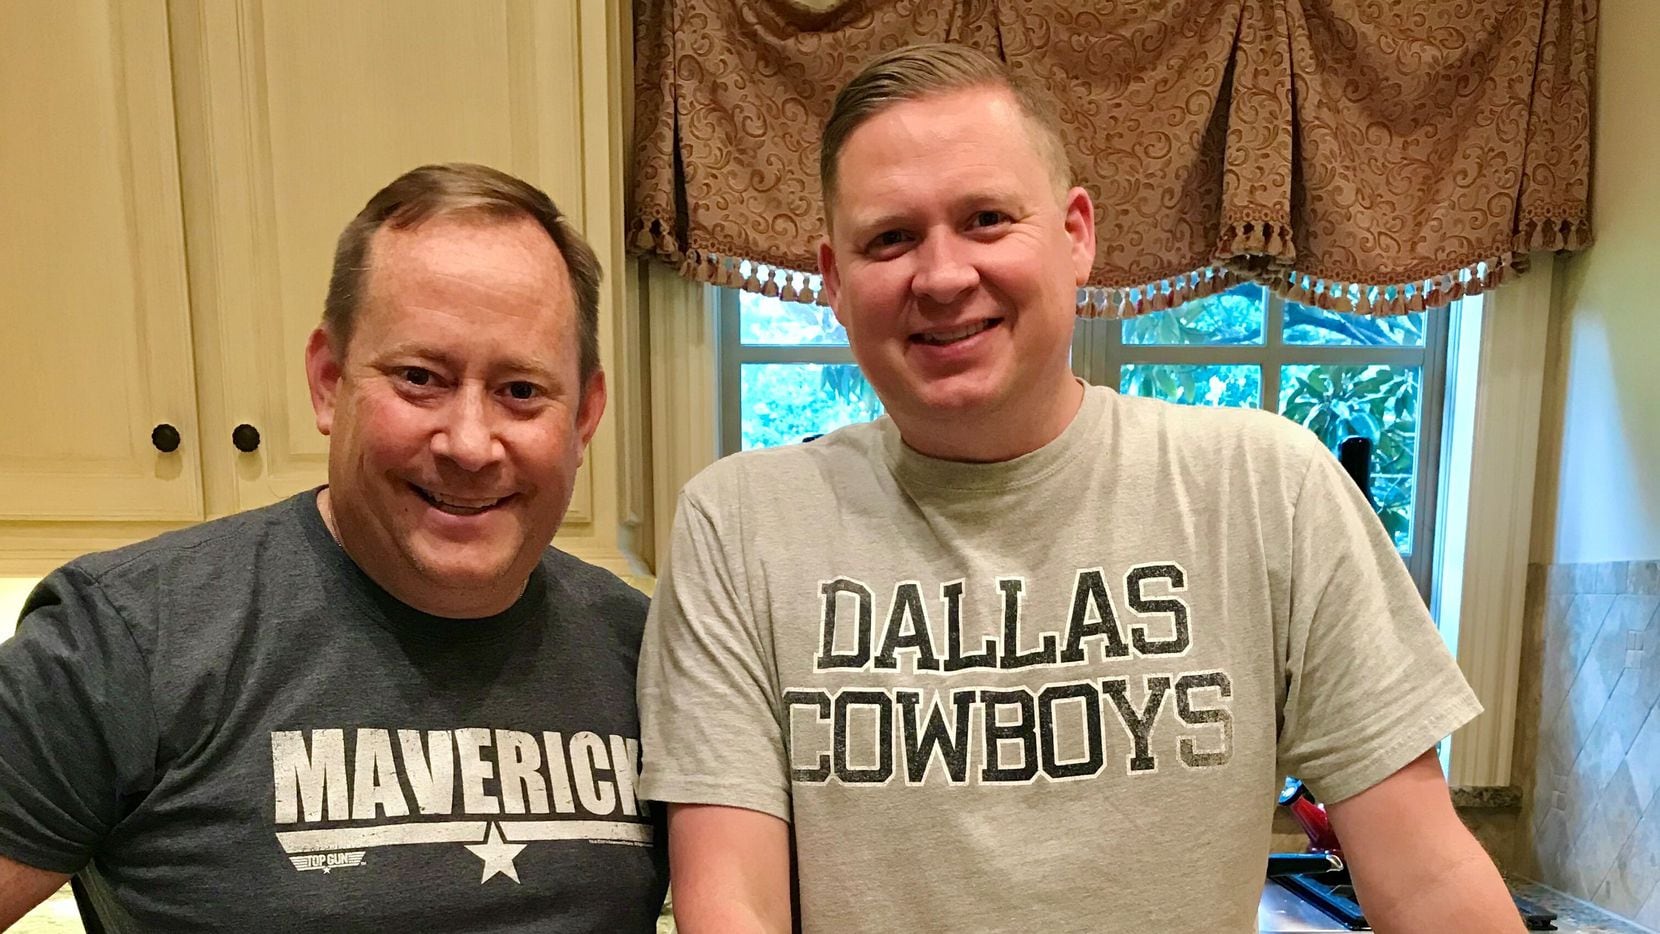 Brothers-in-law Jonathan Boyd (left) and Josh Eason have been hosting their "Cowboy Cookup" meals for family and friends since 2005, and aren't about to abandon the tradition now. After all, the Cowboys finished the regular season at 12-5 and are in the playoffs. Is the secret in the sauce?